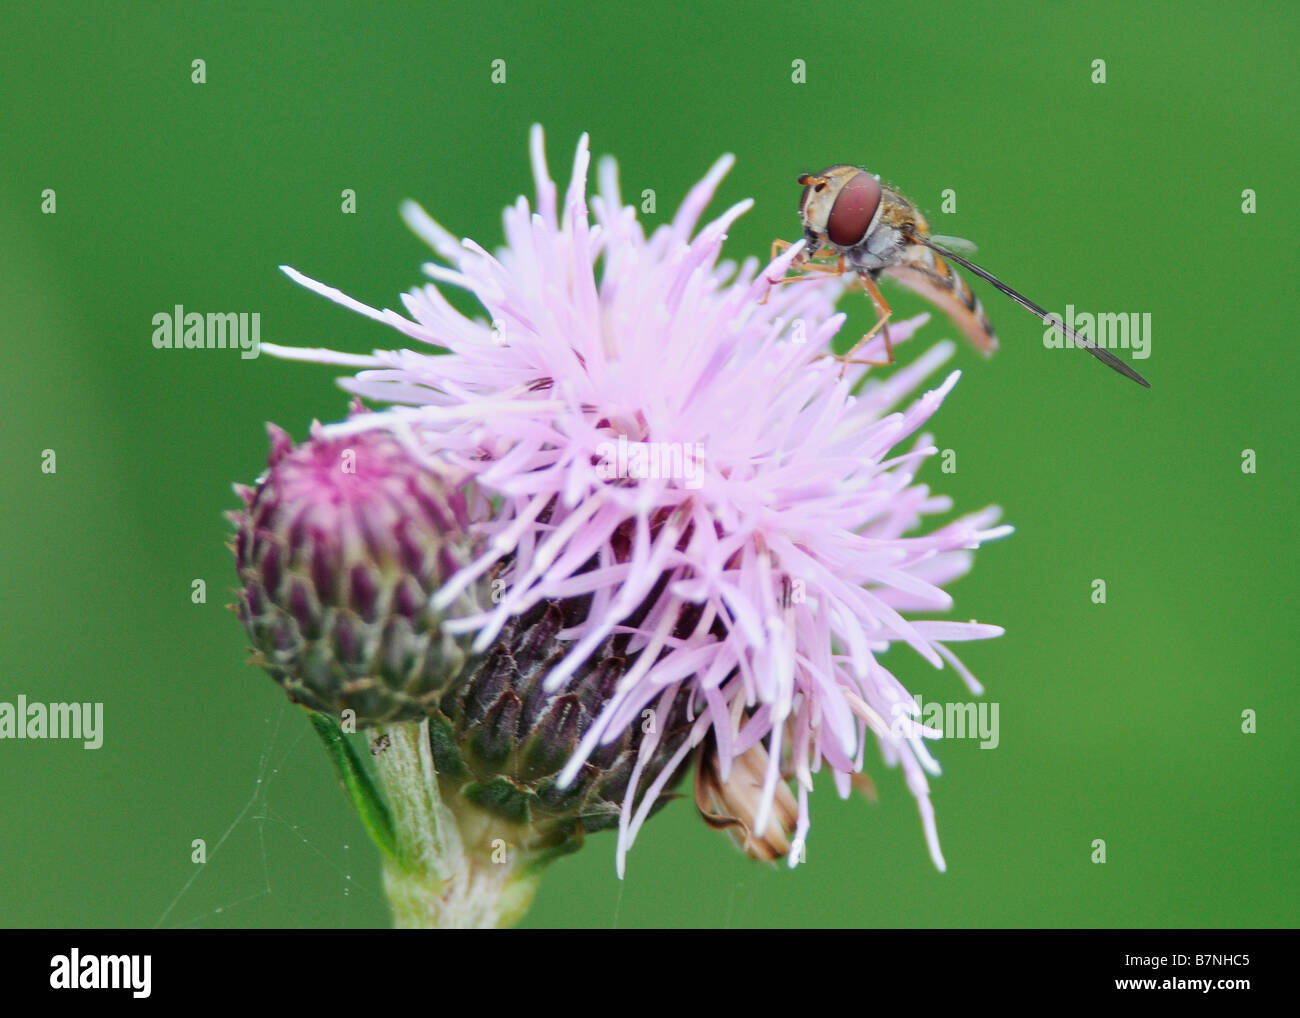 Fly sucking nectar from thistle Stock Photo